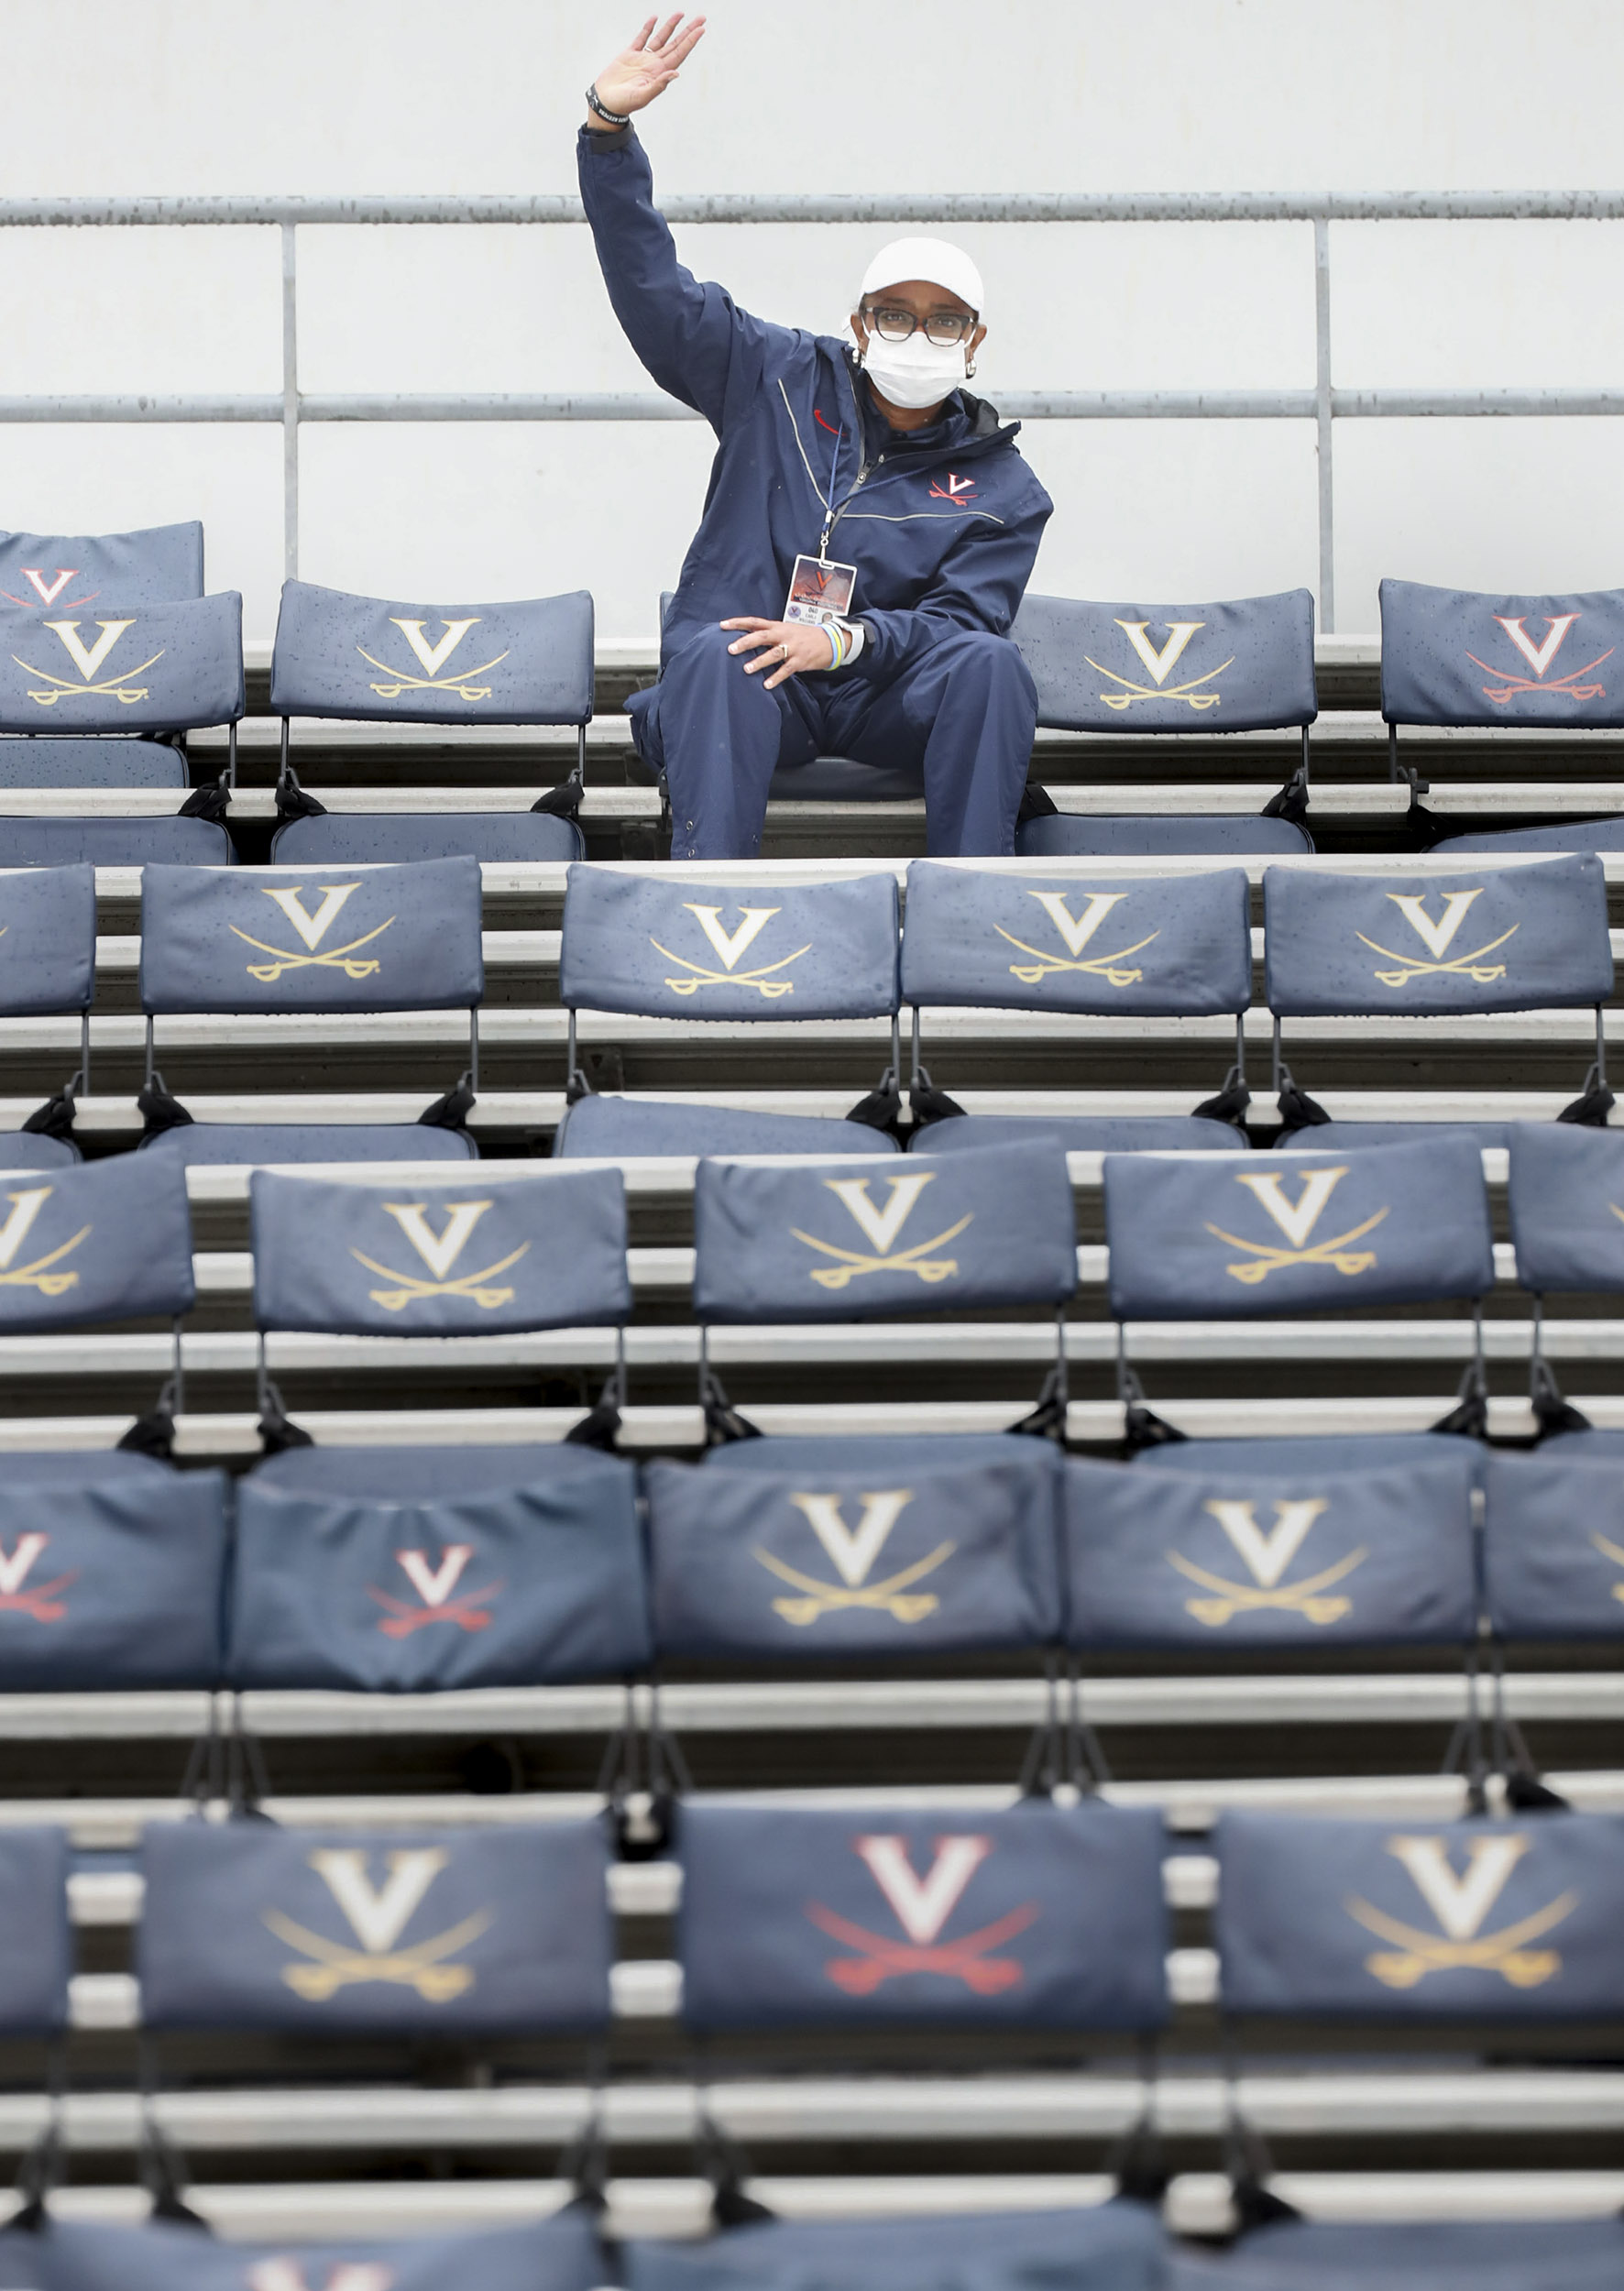 UVA Staff member sitting at the very top of the stands waving to the camera many rows down